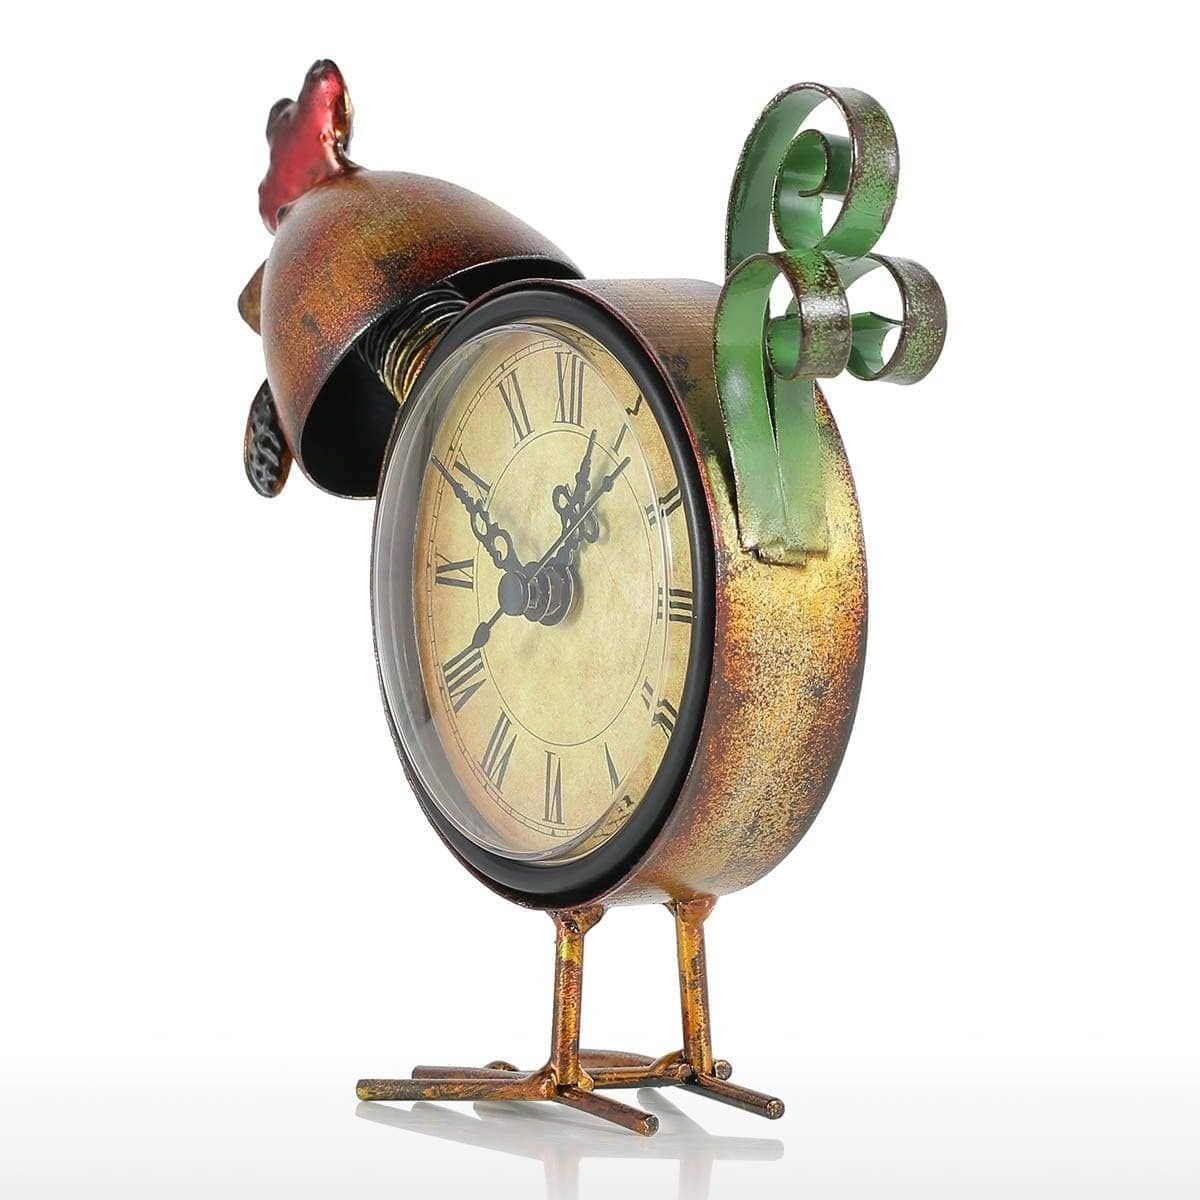 Chick Decor Table Alarm - Delightful Wake-Up Call for Your Morning Routine